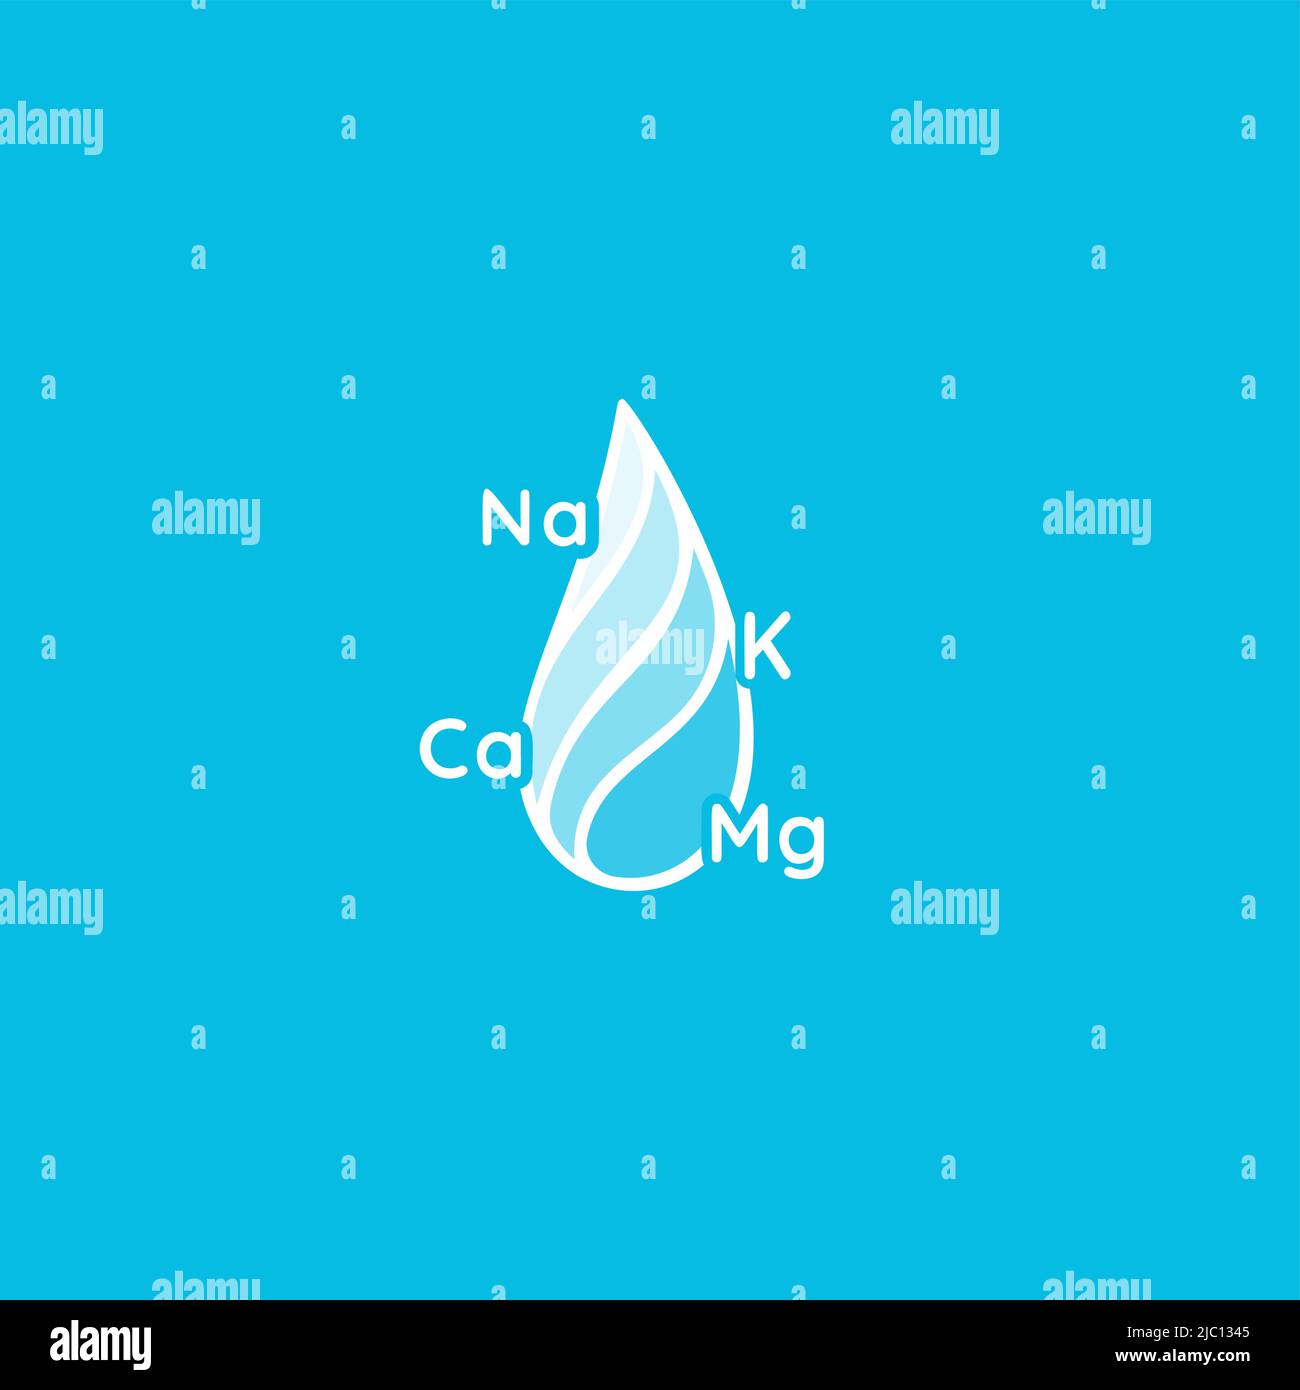 Mineral water logo. Soda with microelements and macroelements, saturated electrolytes liquid icon. Drop icon with magnesium, calcium, potassium, and Stock Vector